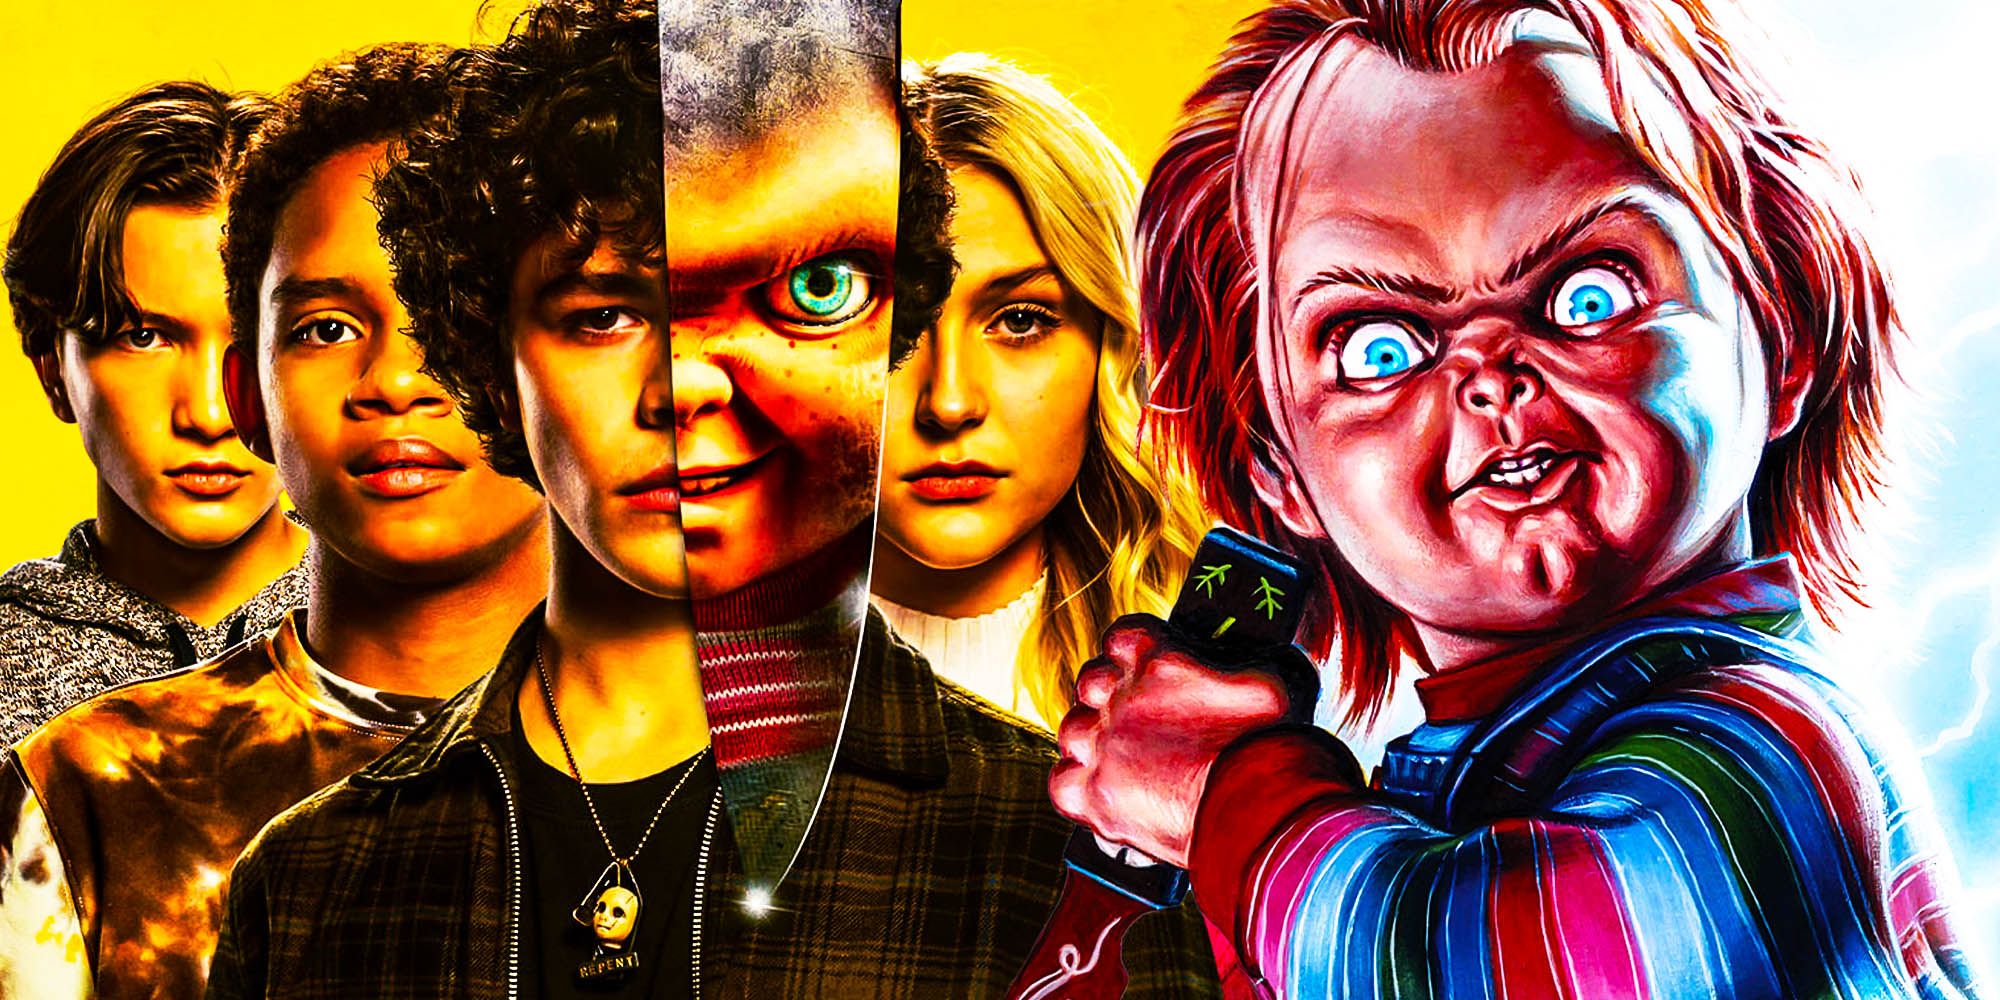 Childs play most consistent horror franchise chuky